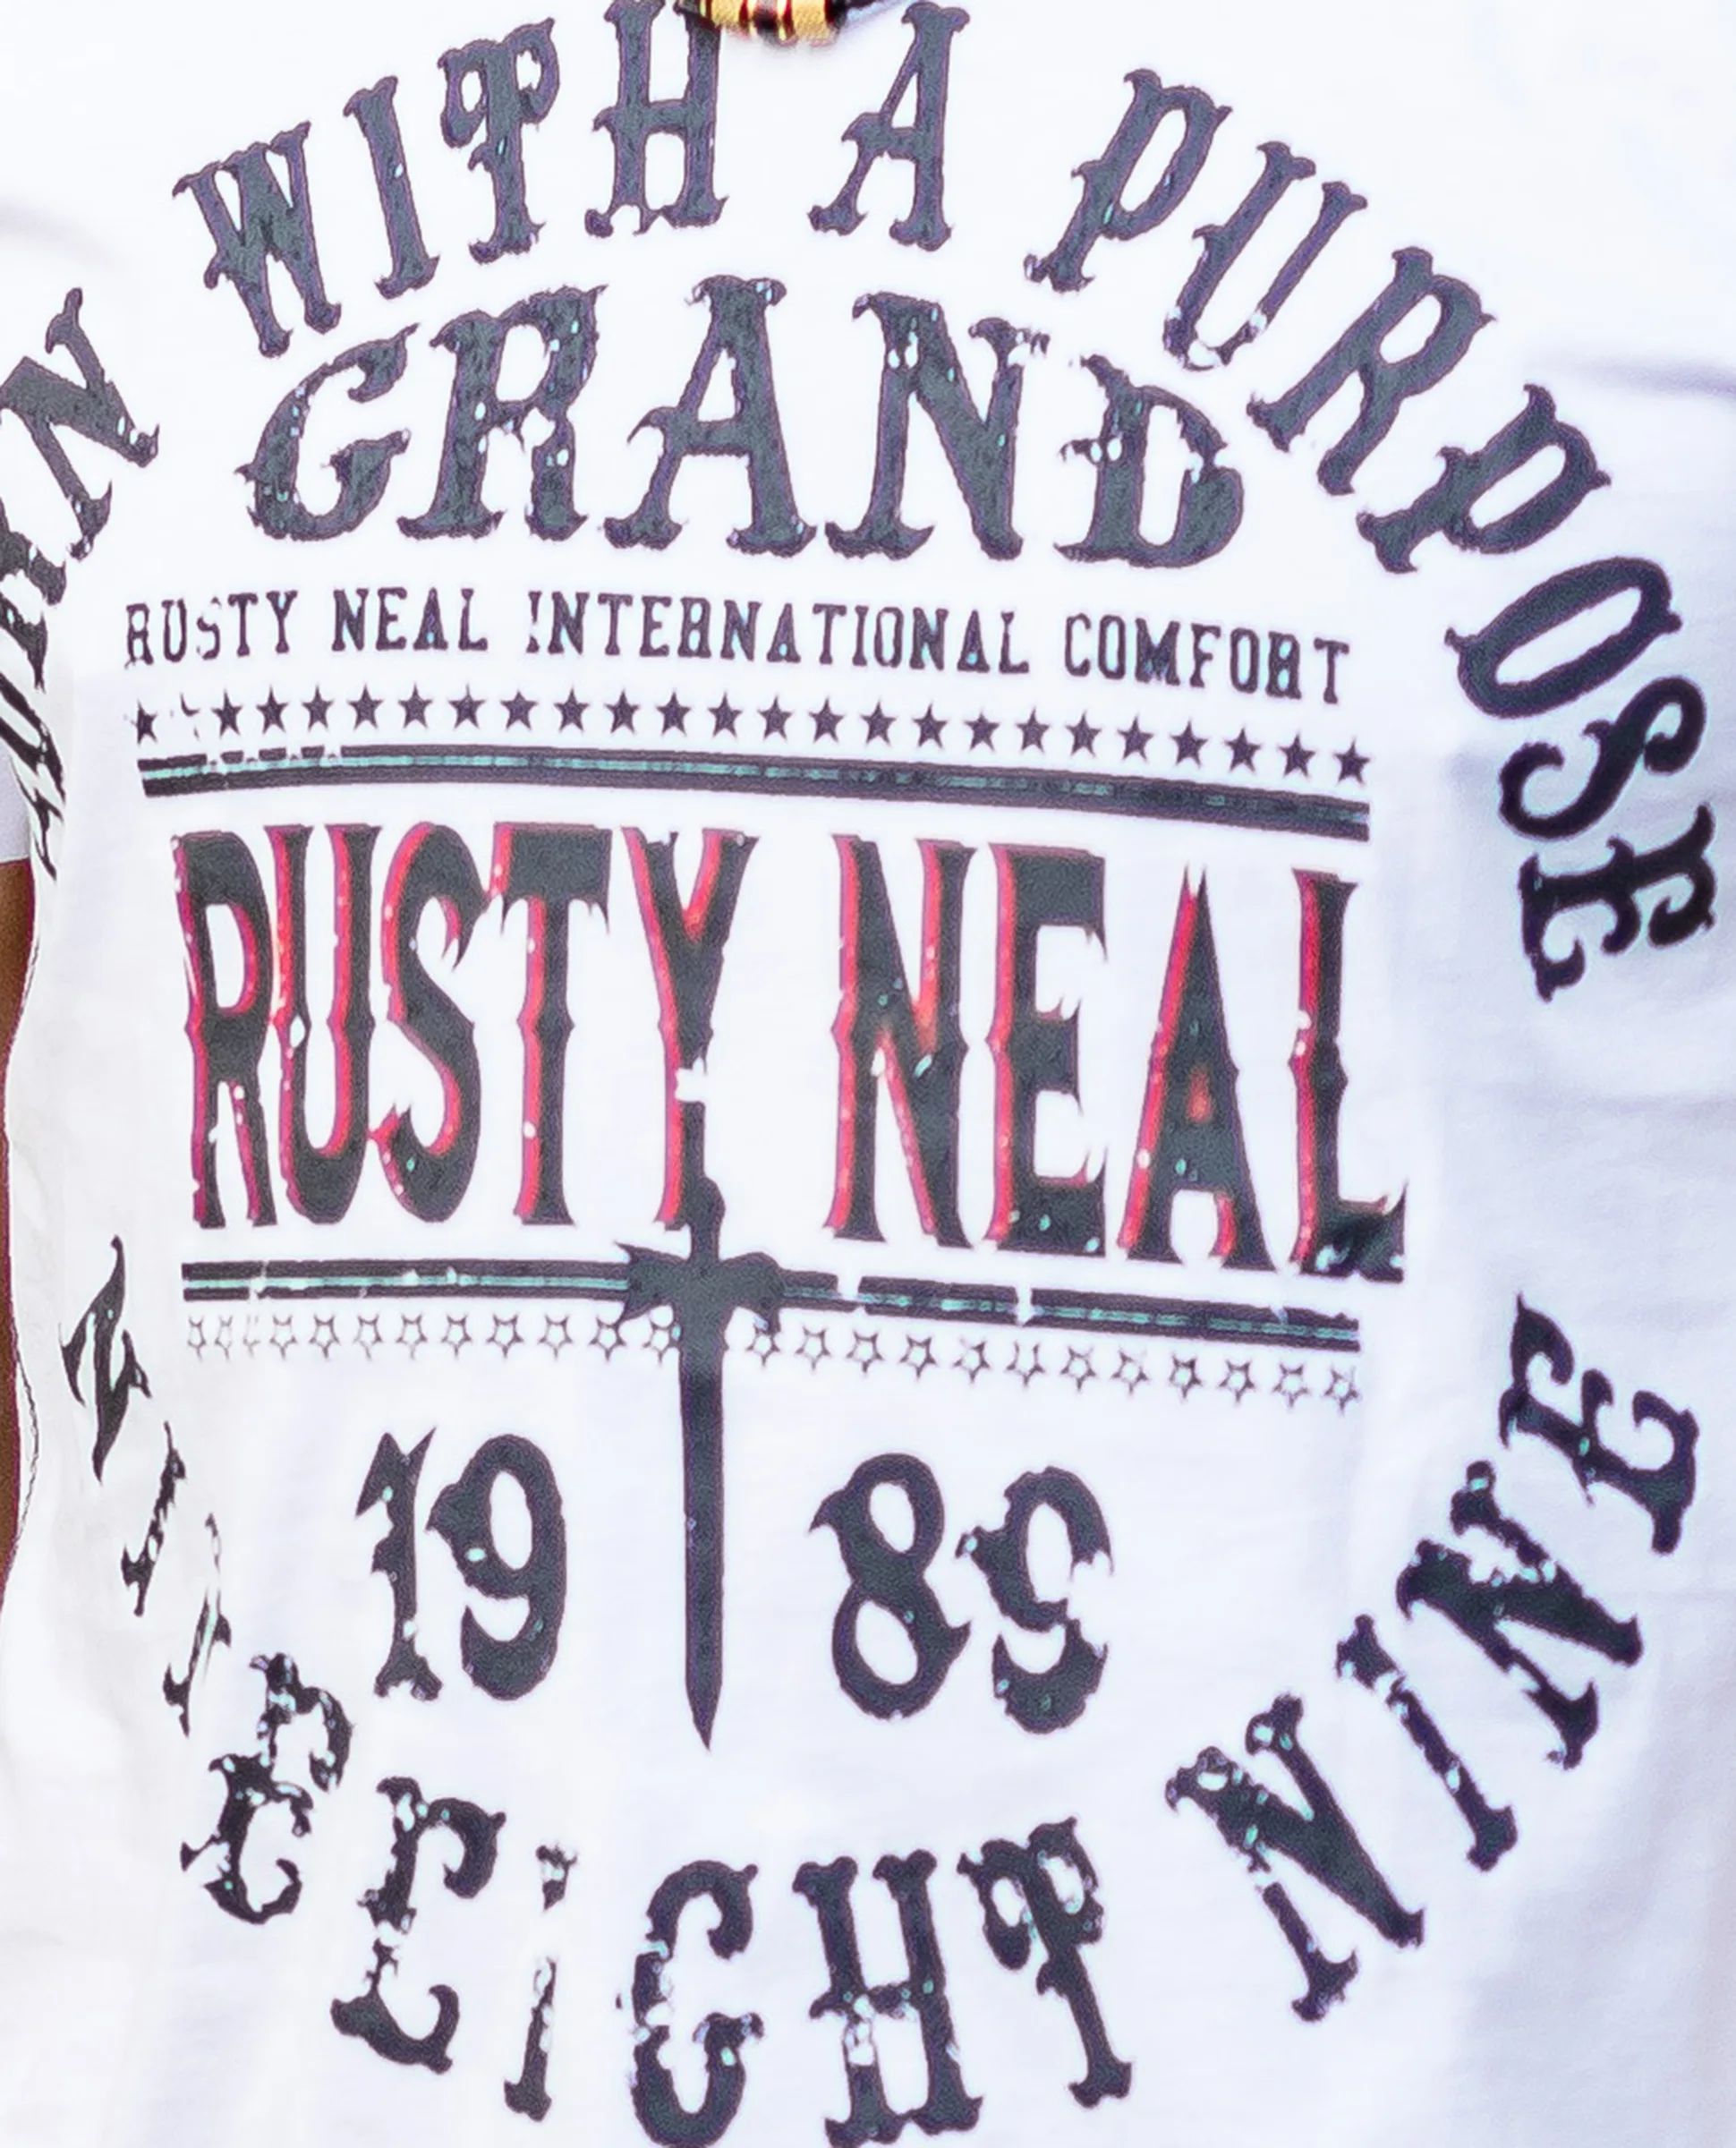 Born White With T-Shirt Rusty Neal Purpose A